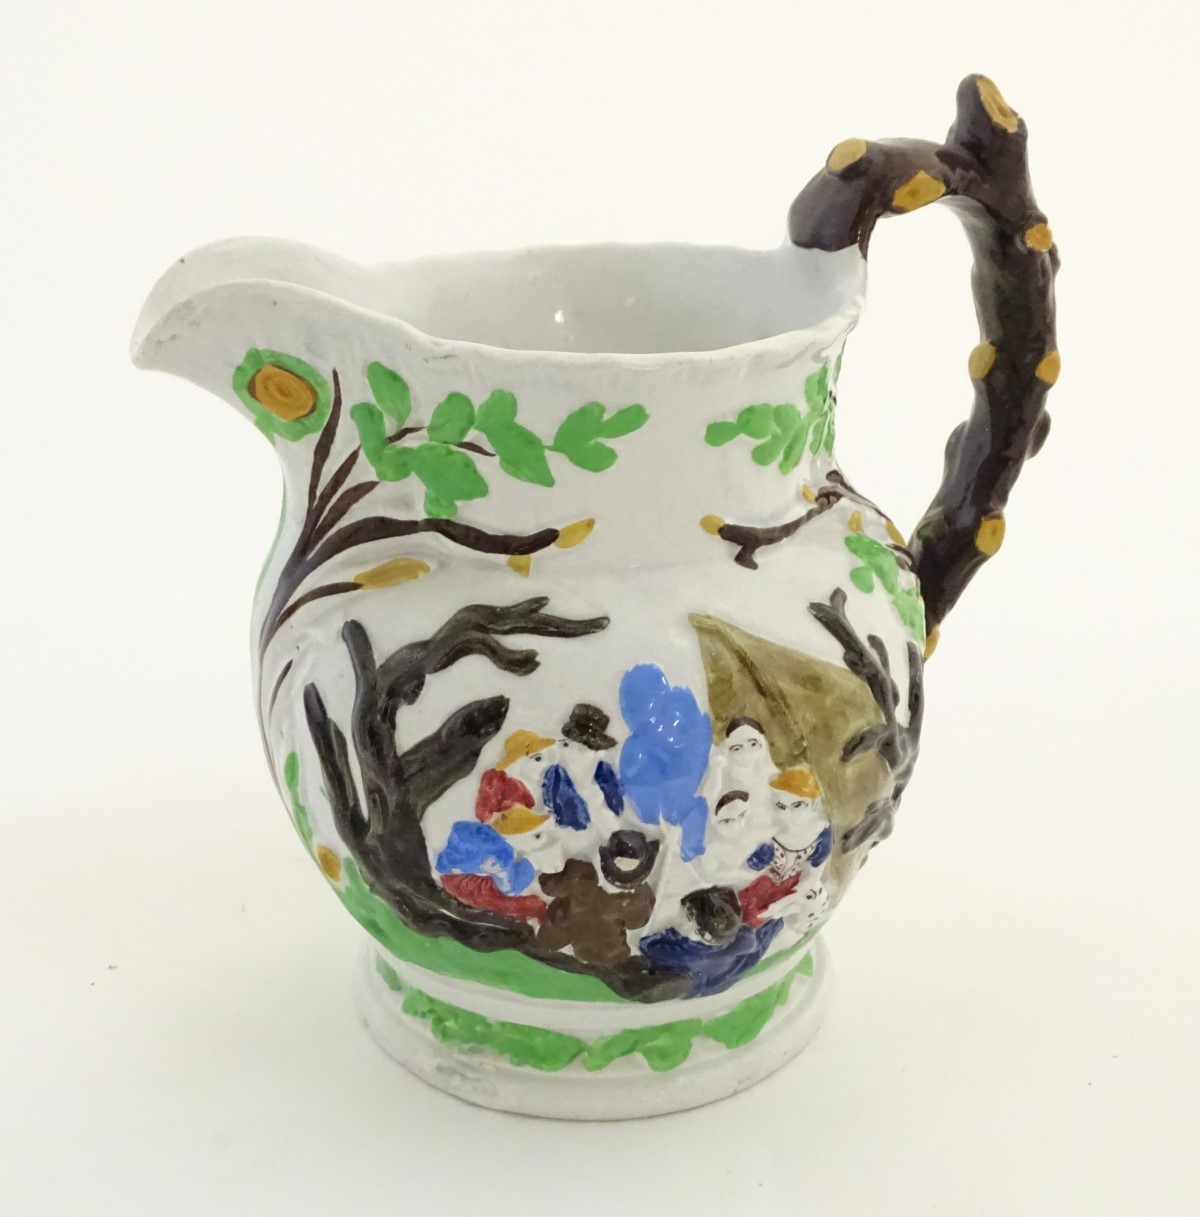 A 19thC Staffordshire Pottery Pratt style jug, depicting figures in a landscape with dogs, a horse, - Image 2 of 8